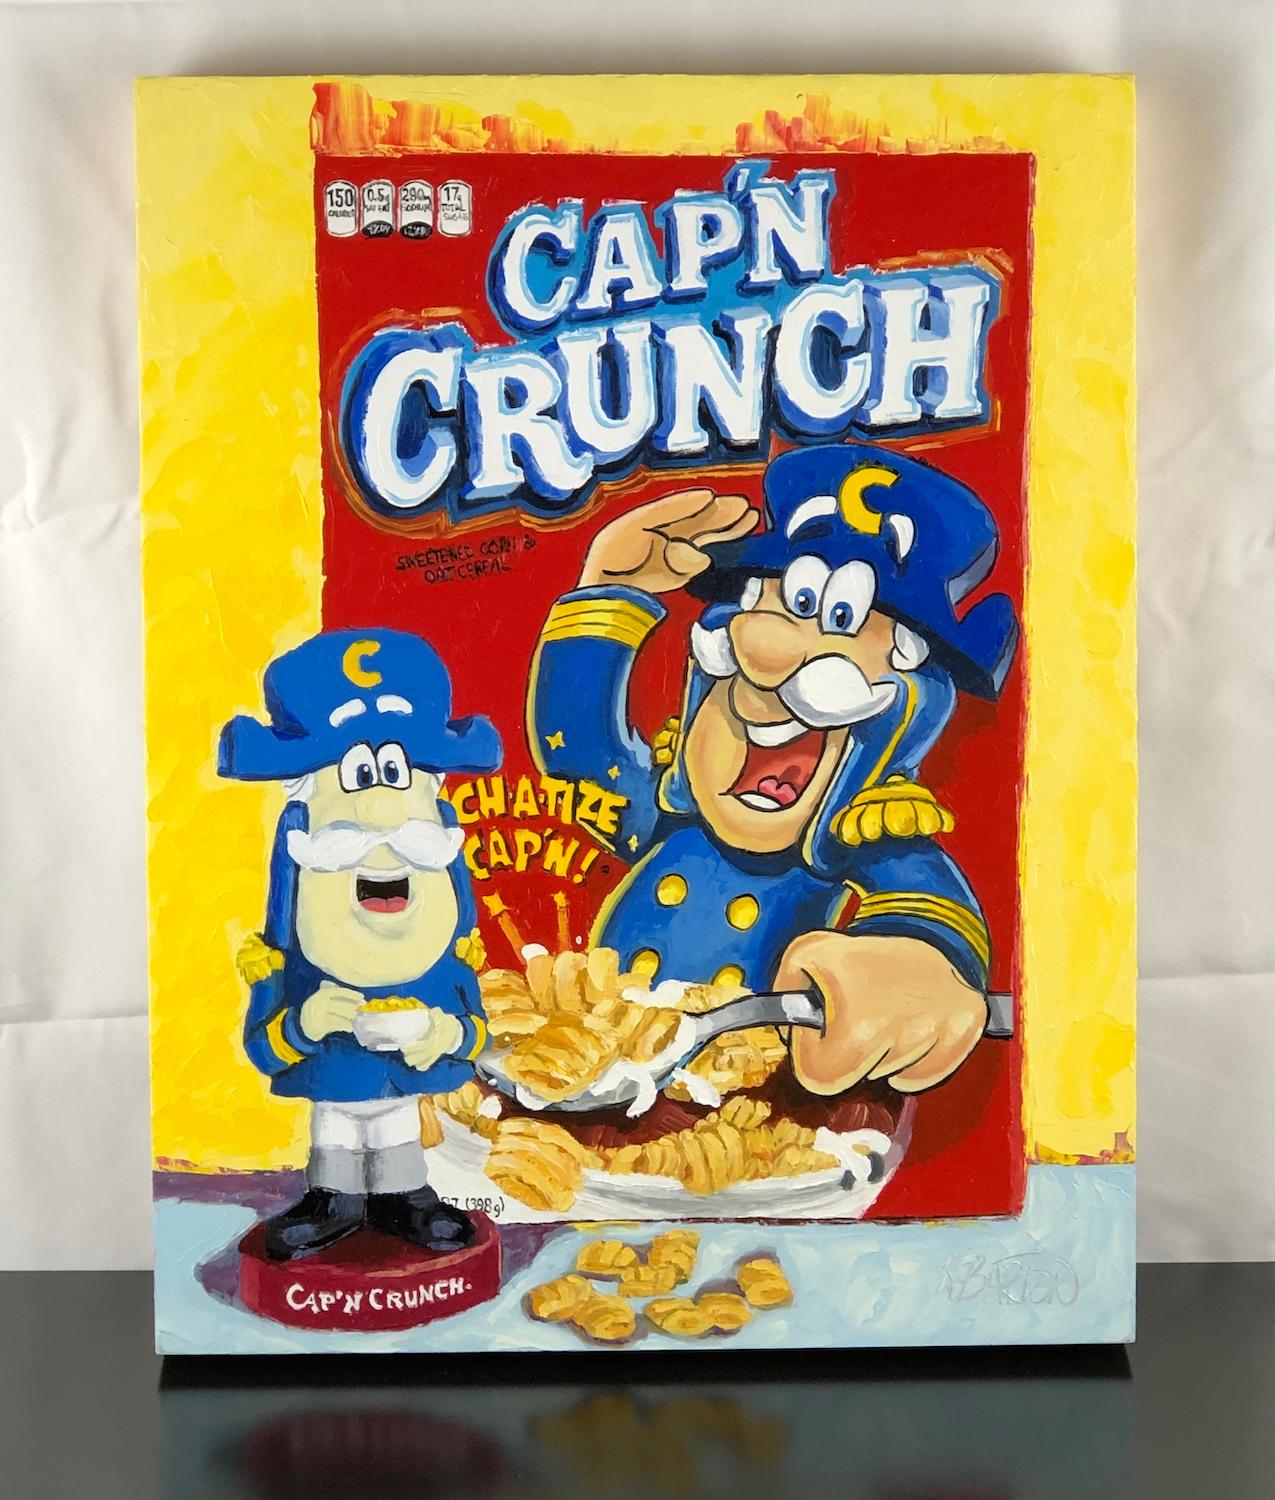 <p>Artist Comments<br>A bright and fun still life showing a box of Cap'n Crunch cereal and toy by artist Karen Barton. Karen describes her paintings as being of a historical nature. She seeks out subject matter that represents a contemporary culture